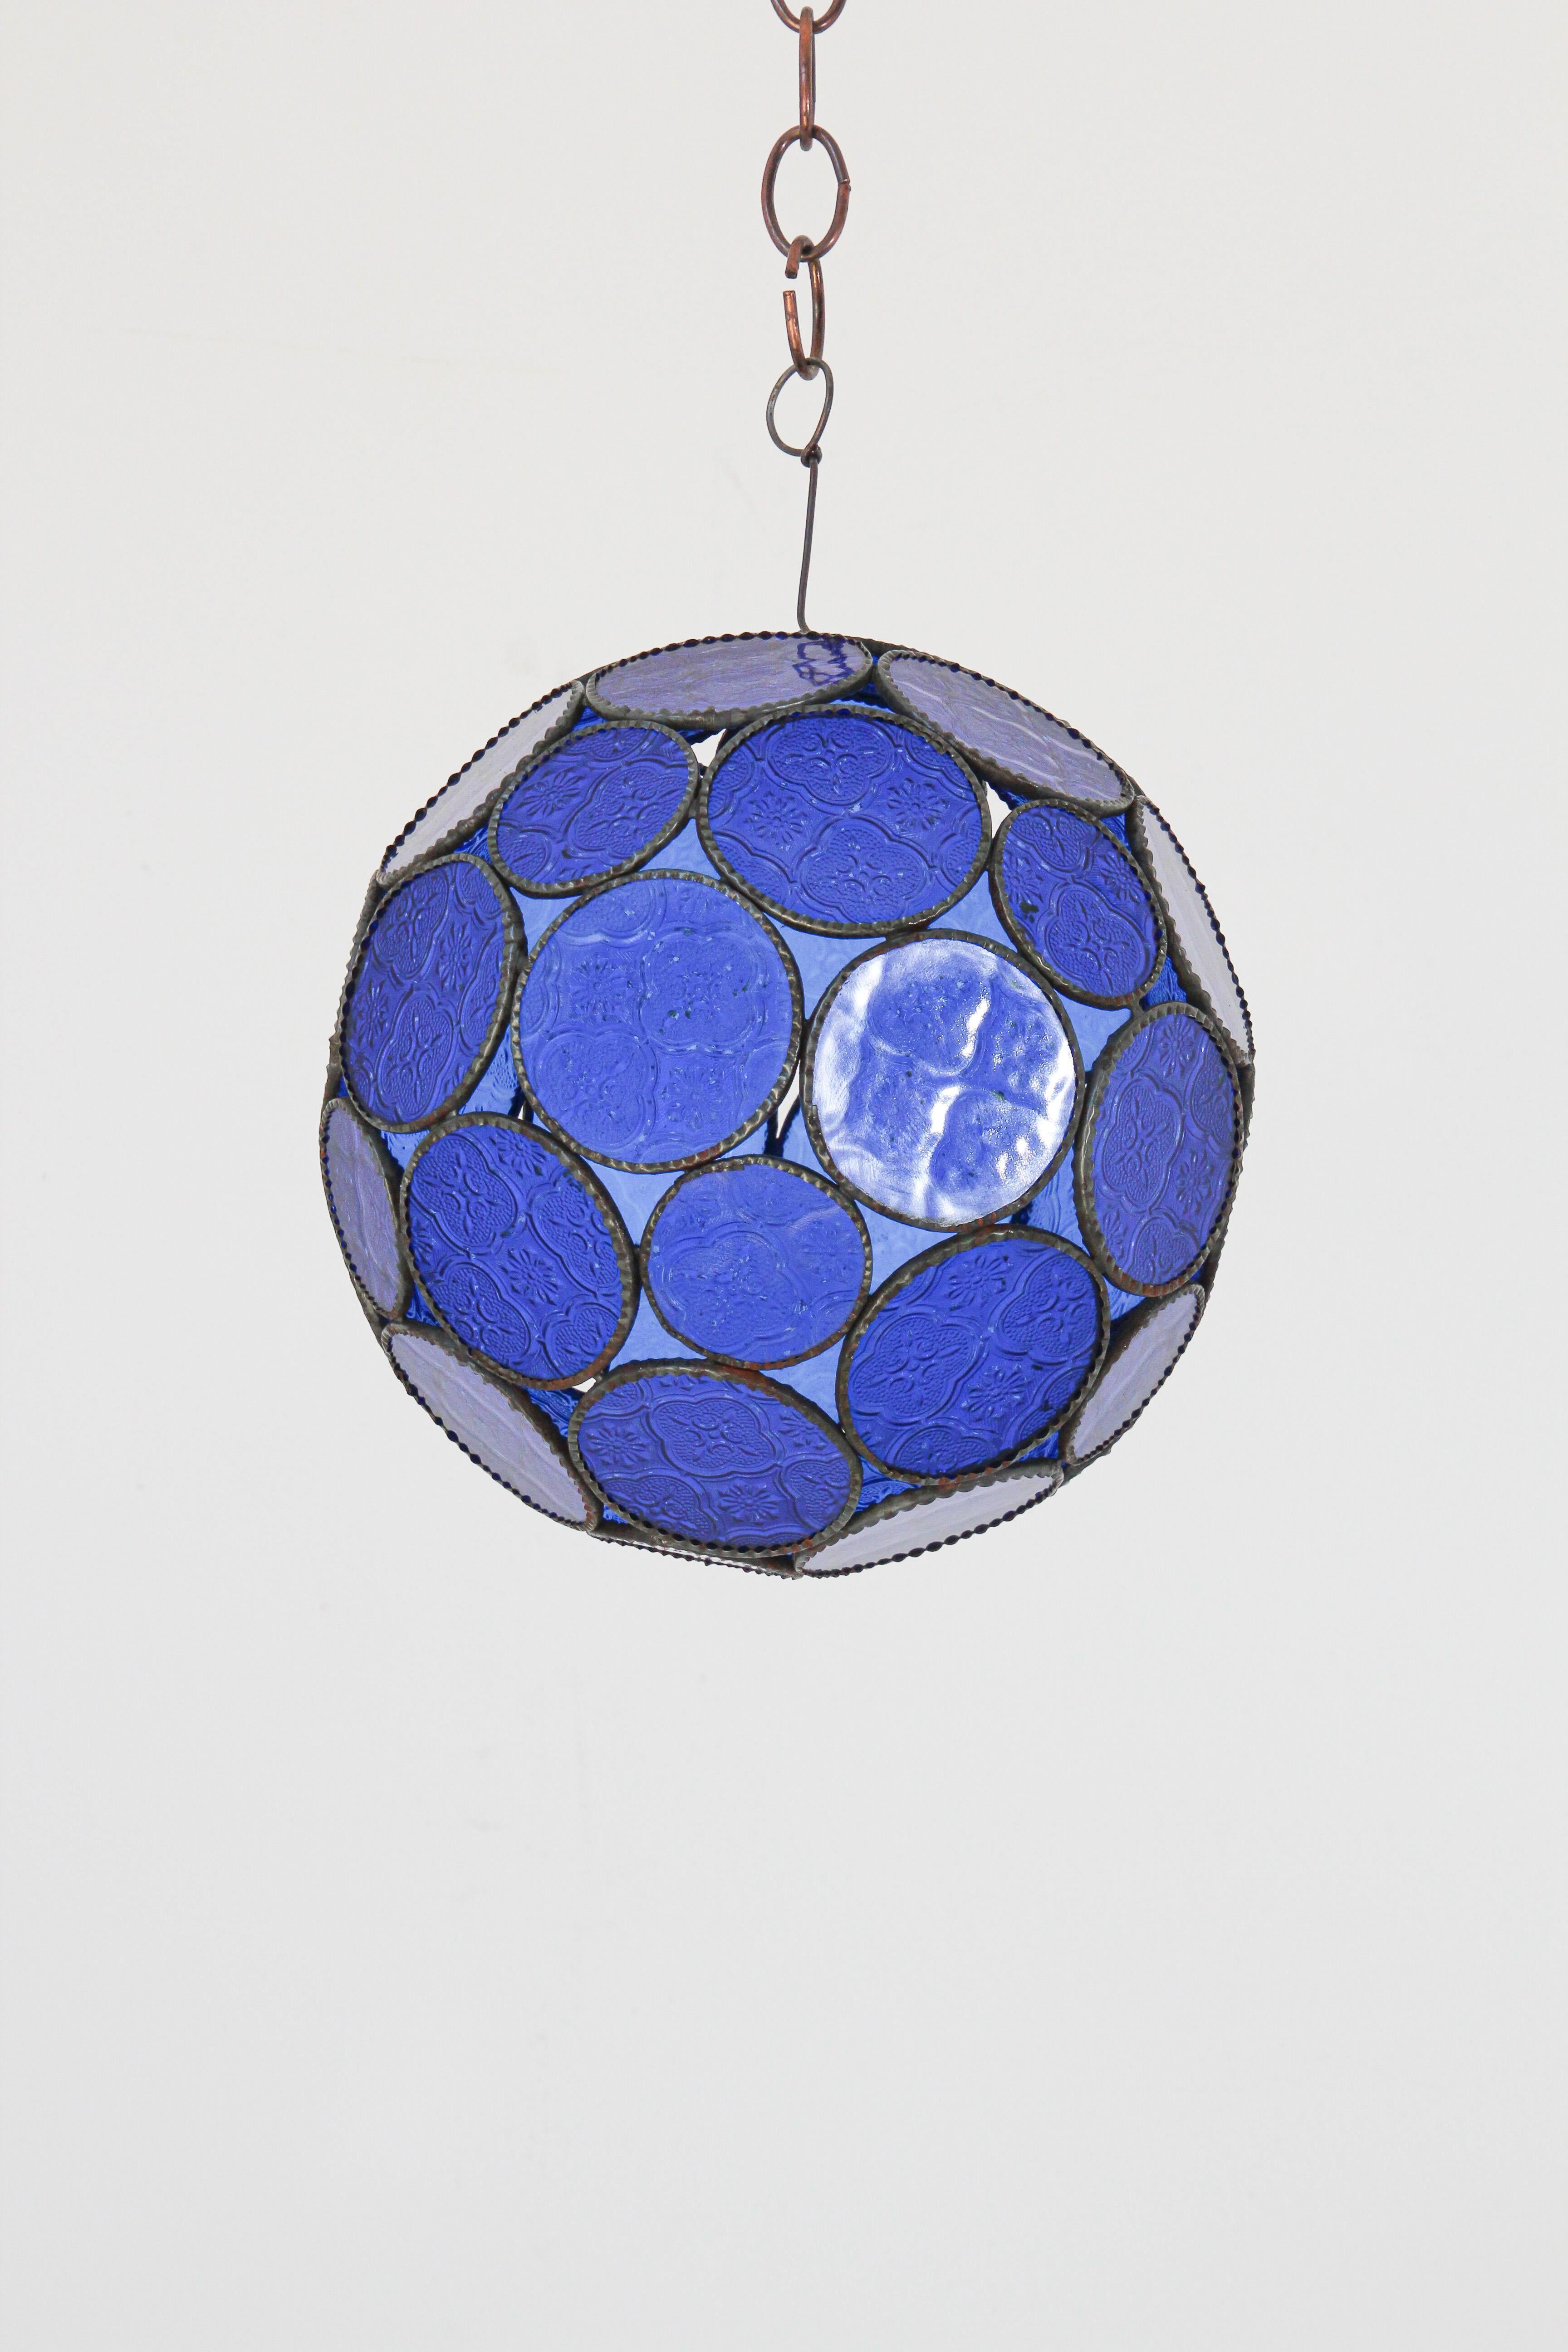 Hand-Crafted Handcrafted Moroccan Moorish Glass Orb Lantern with Blue Glass For Sale